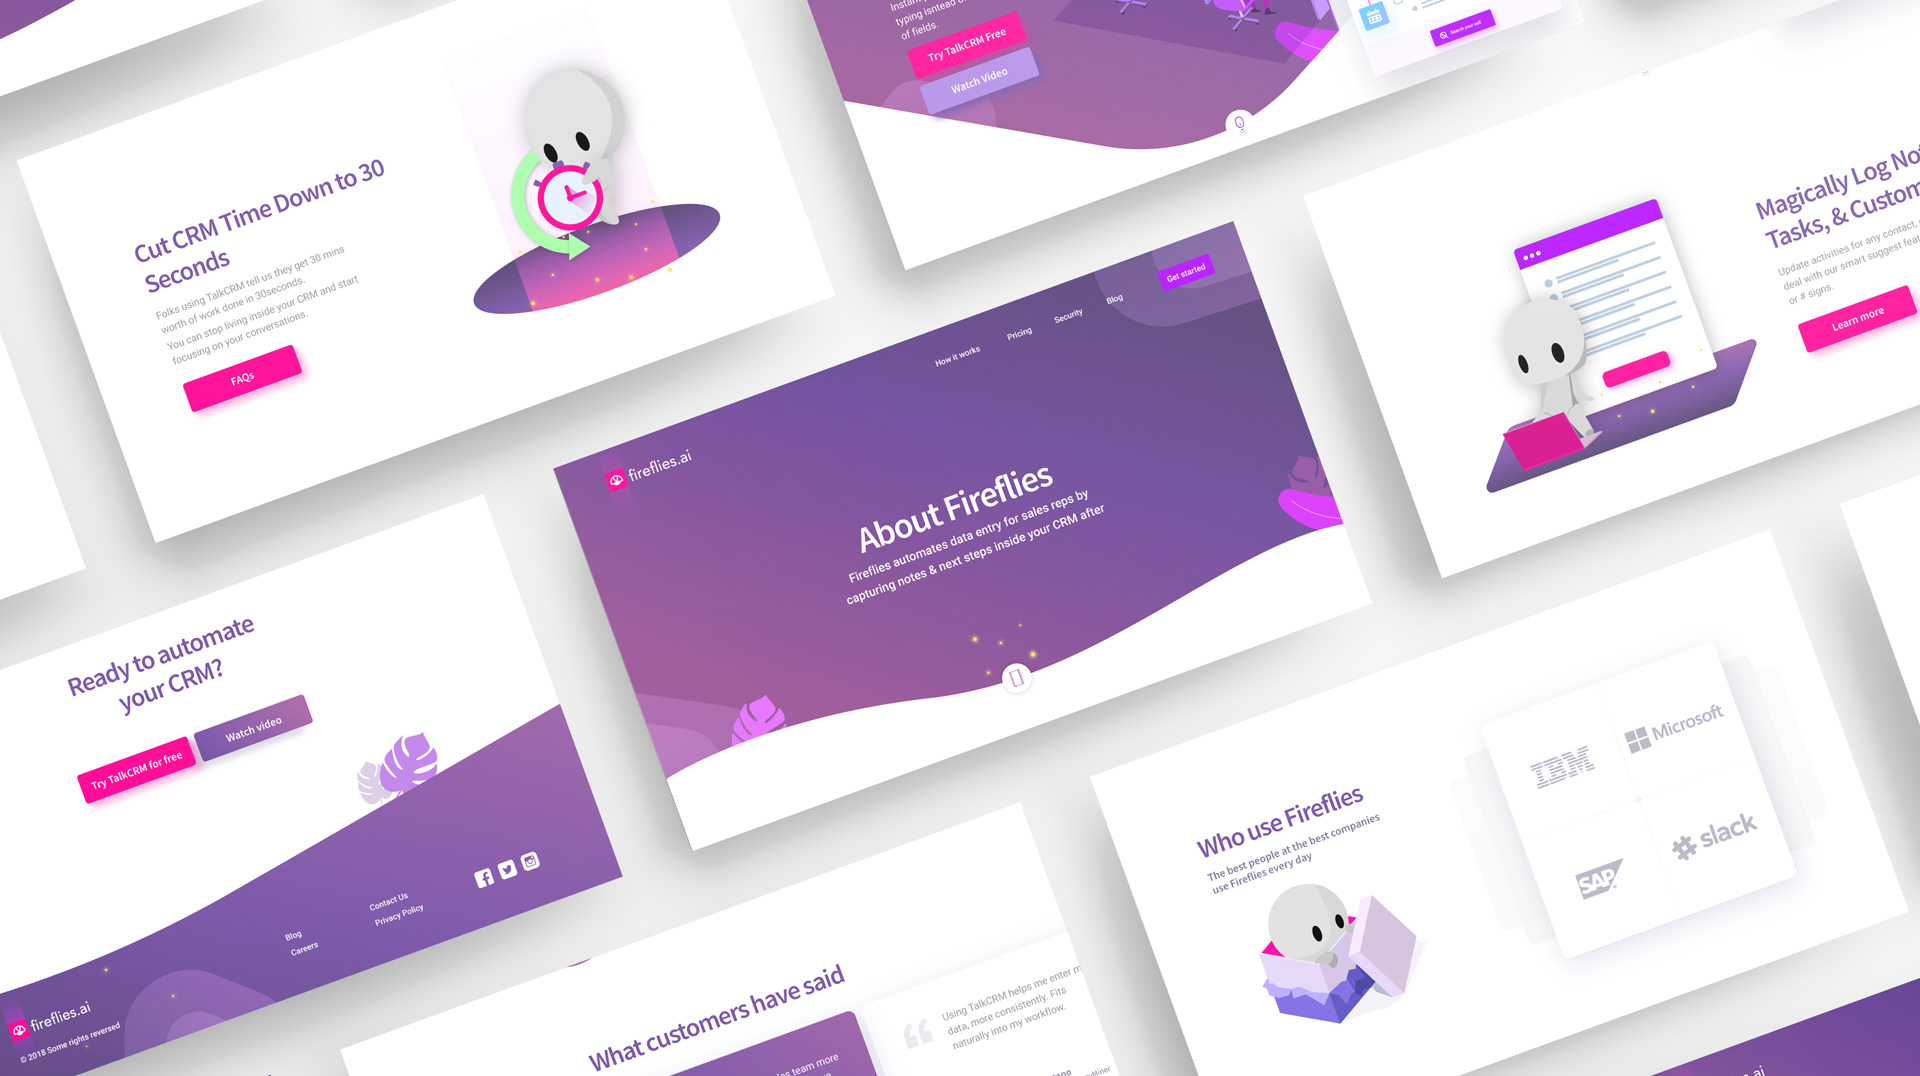 Designs Raymond Shen has made for Fireflies.ai internal web pages